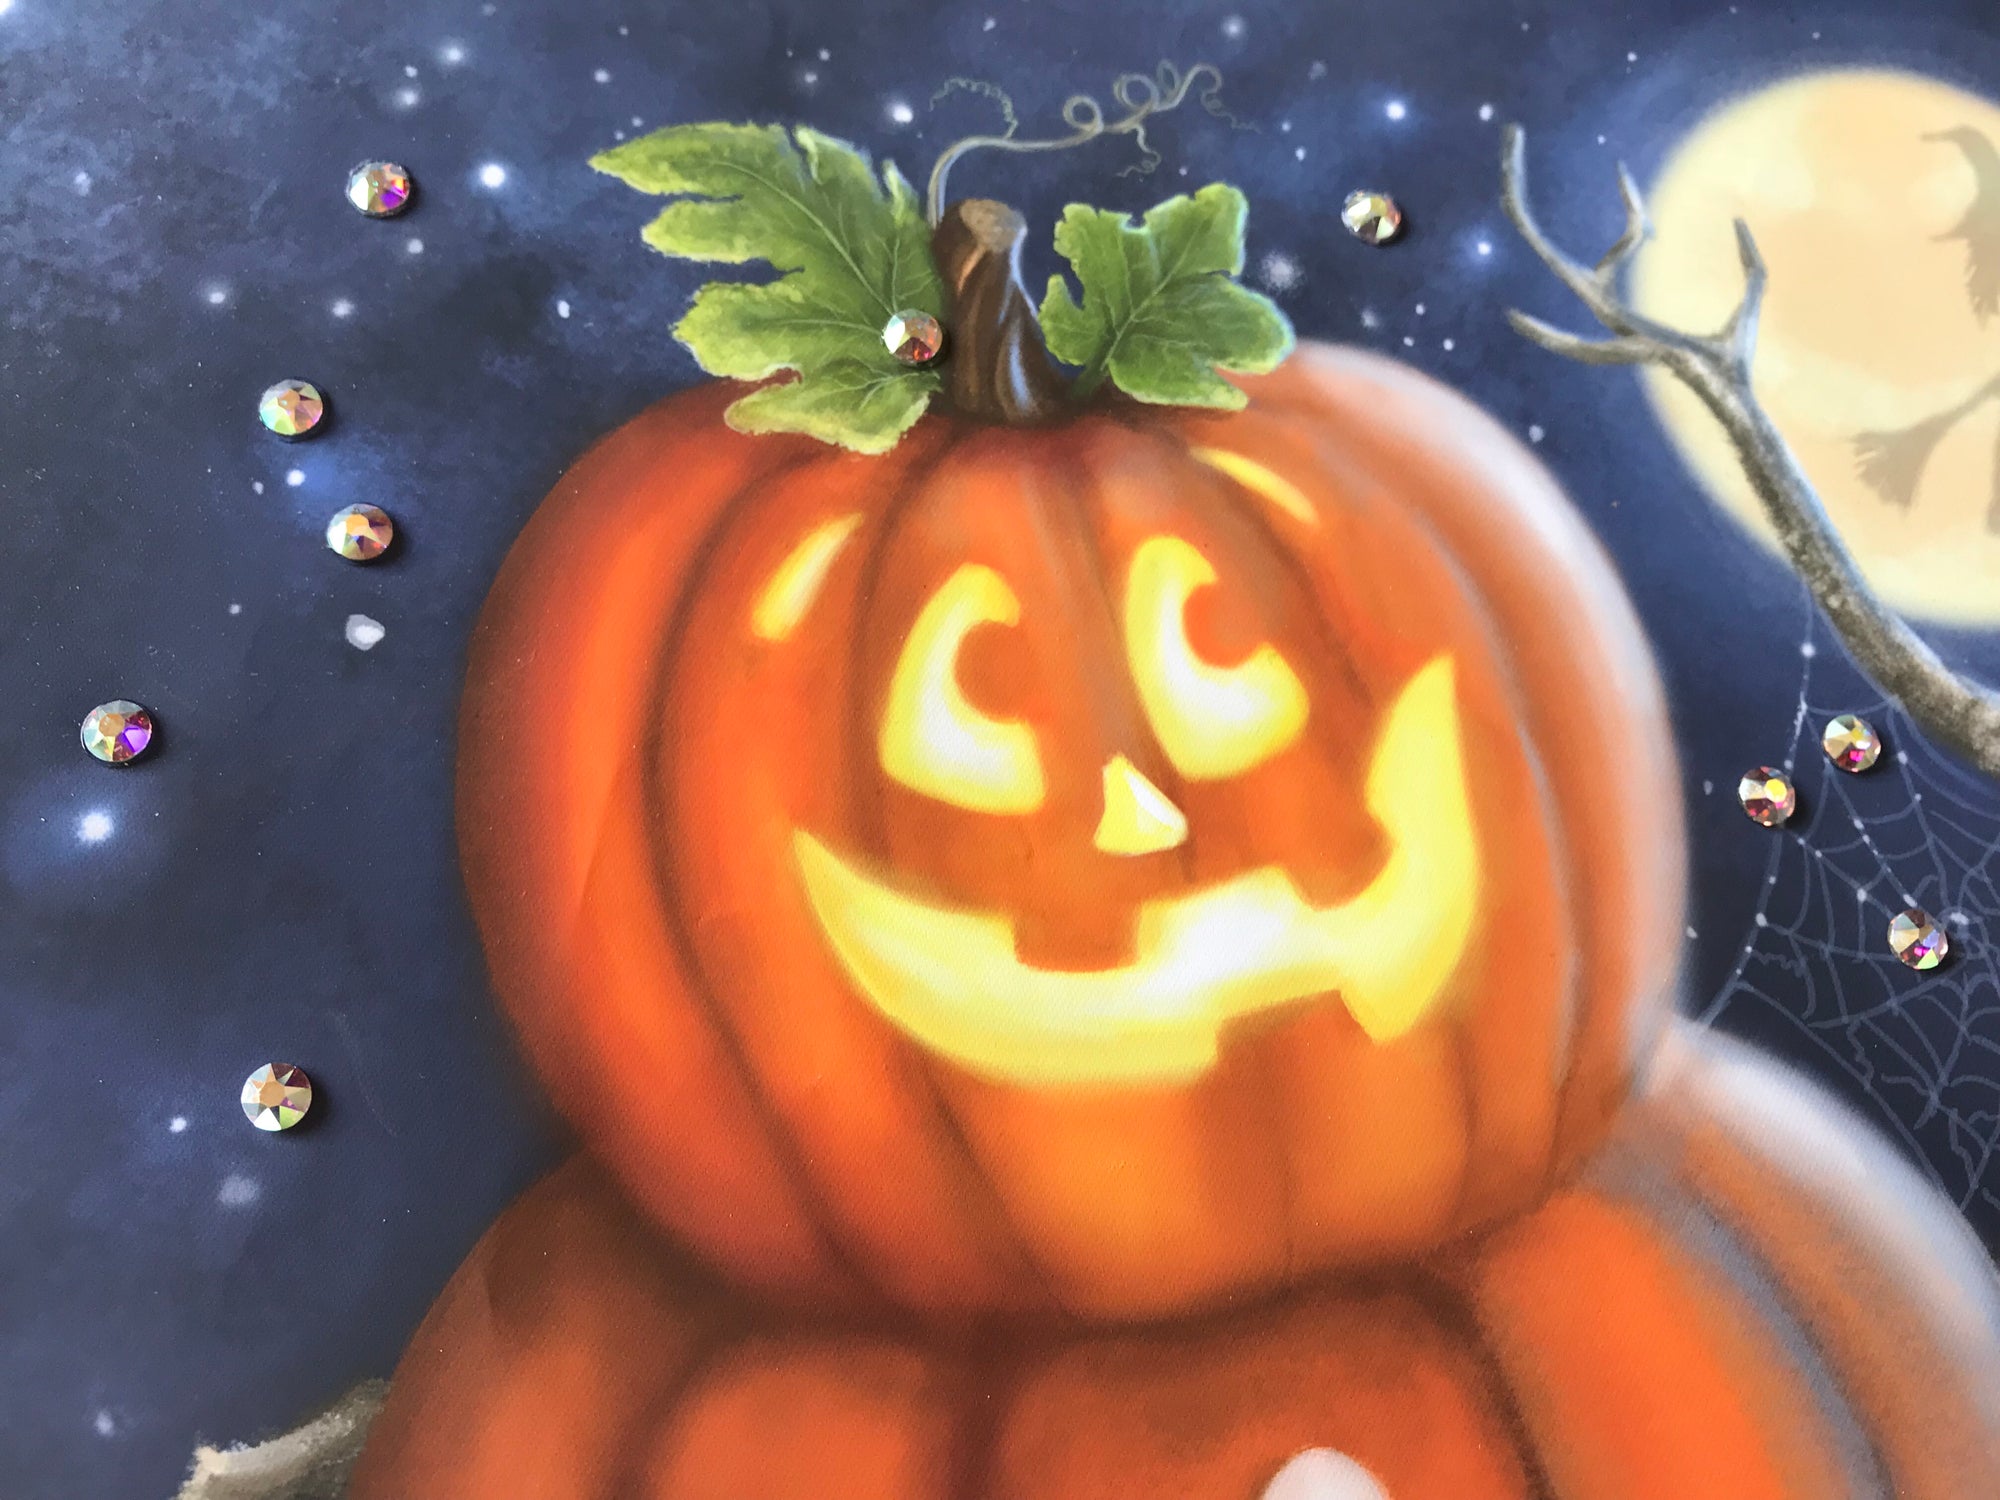 This delightful print features a whimsical jack-o-lantern perched on top of two plump pumpkins, creating a playful snowman-like figure that is sure to bring a smile to your face.  Guiding your way to the sweetest treats is a charming sign that reads "treats this way," adding a touch of magic to this already delightful scene. The backdrop of a full moon casts a romantic glow, while the silhouette of a witch flying on her broomstick across the moon.